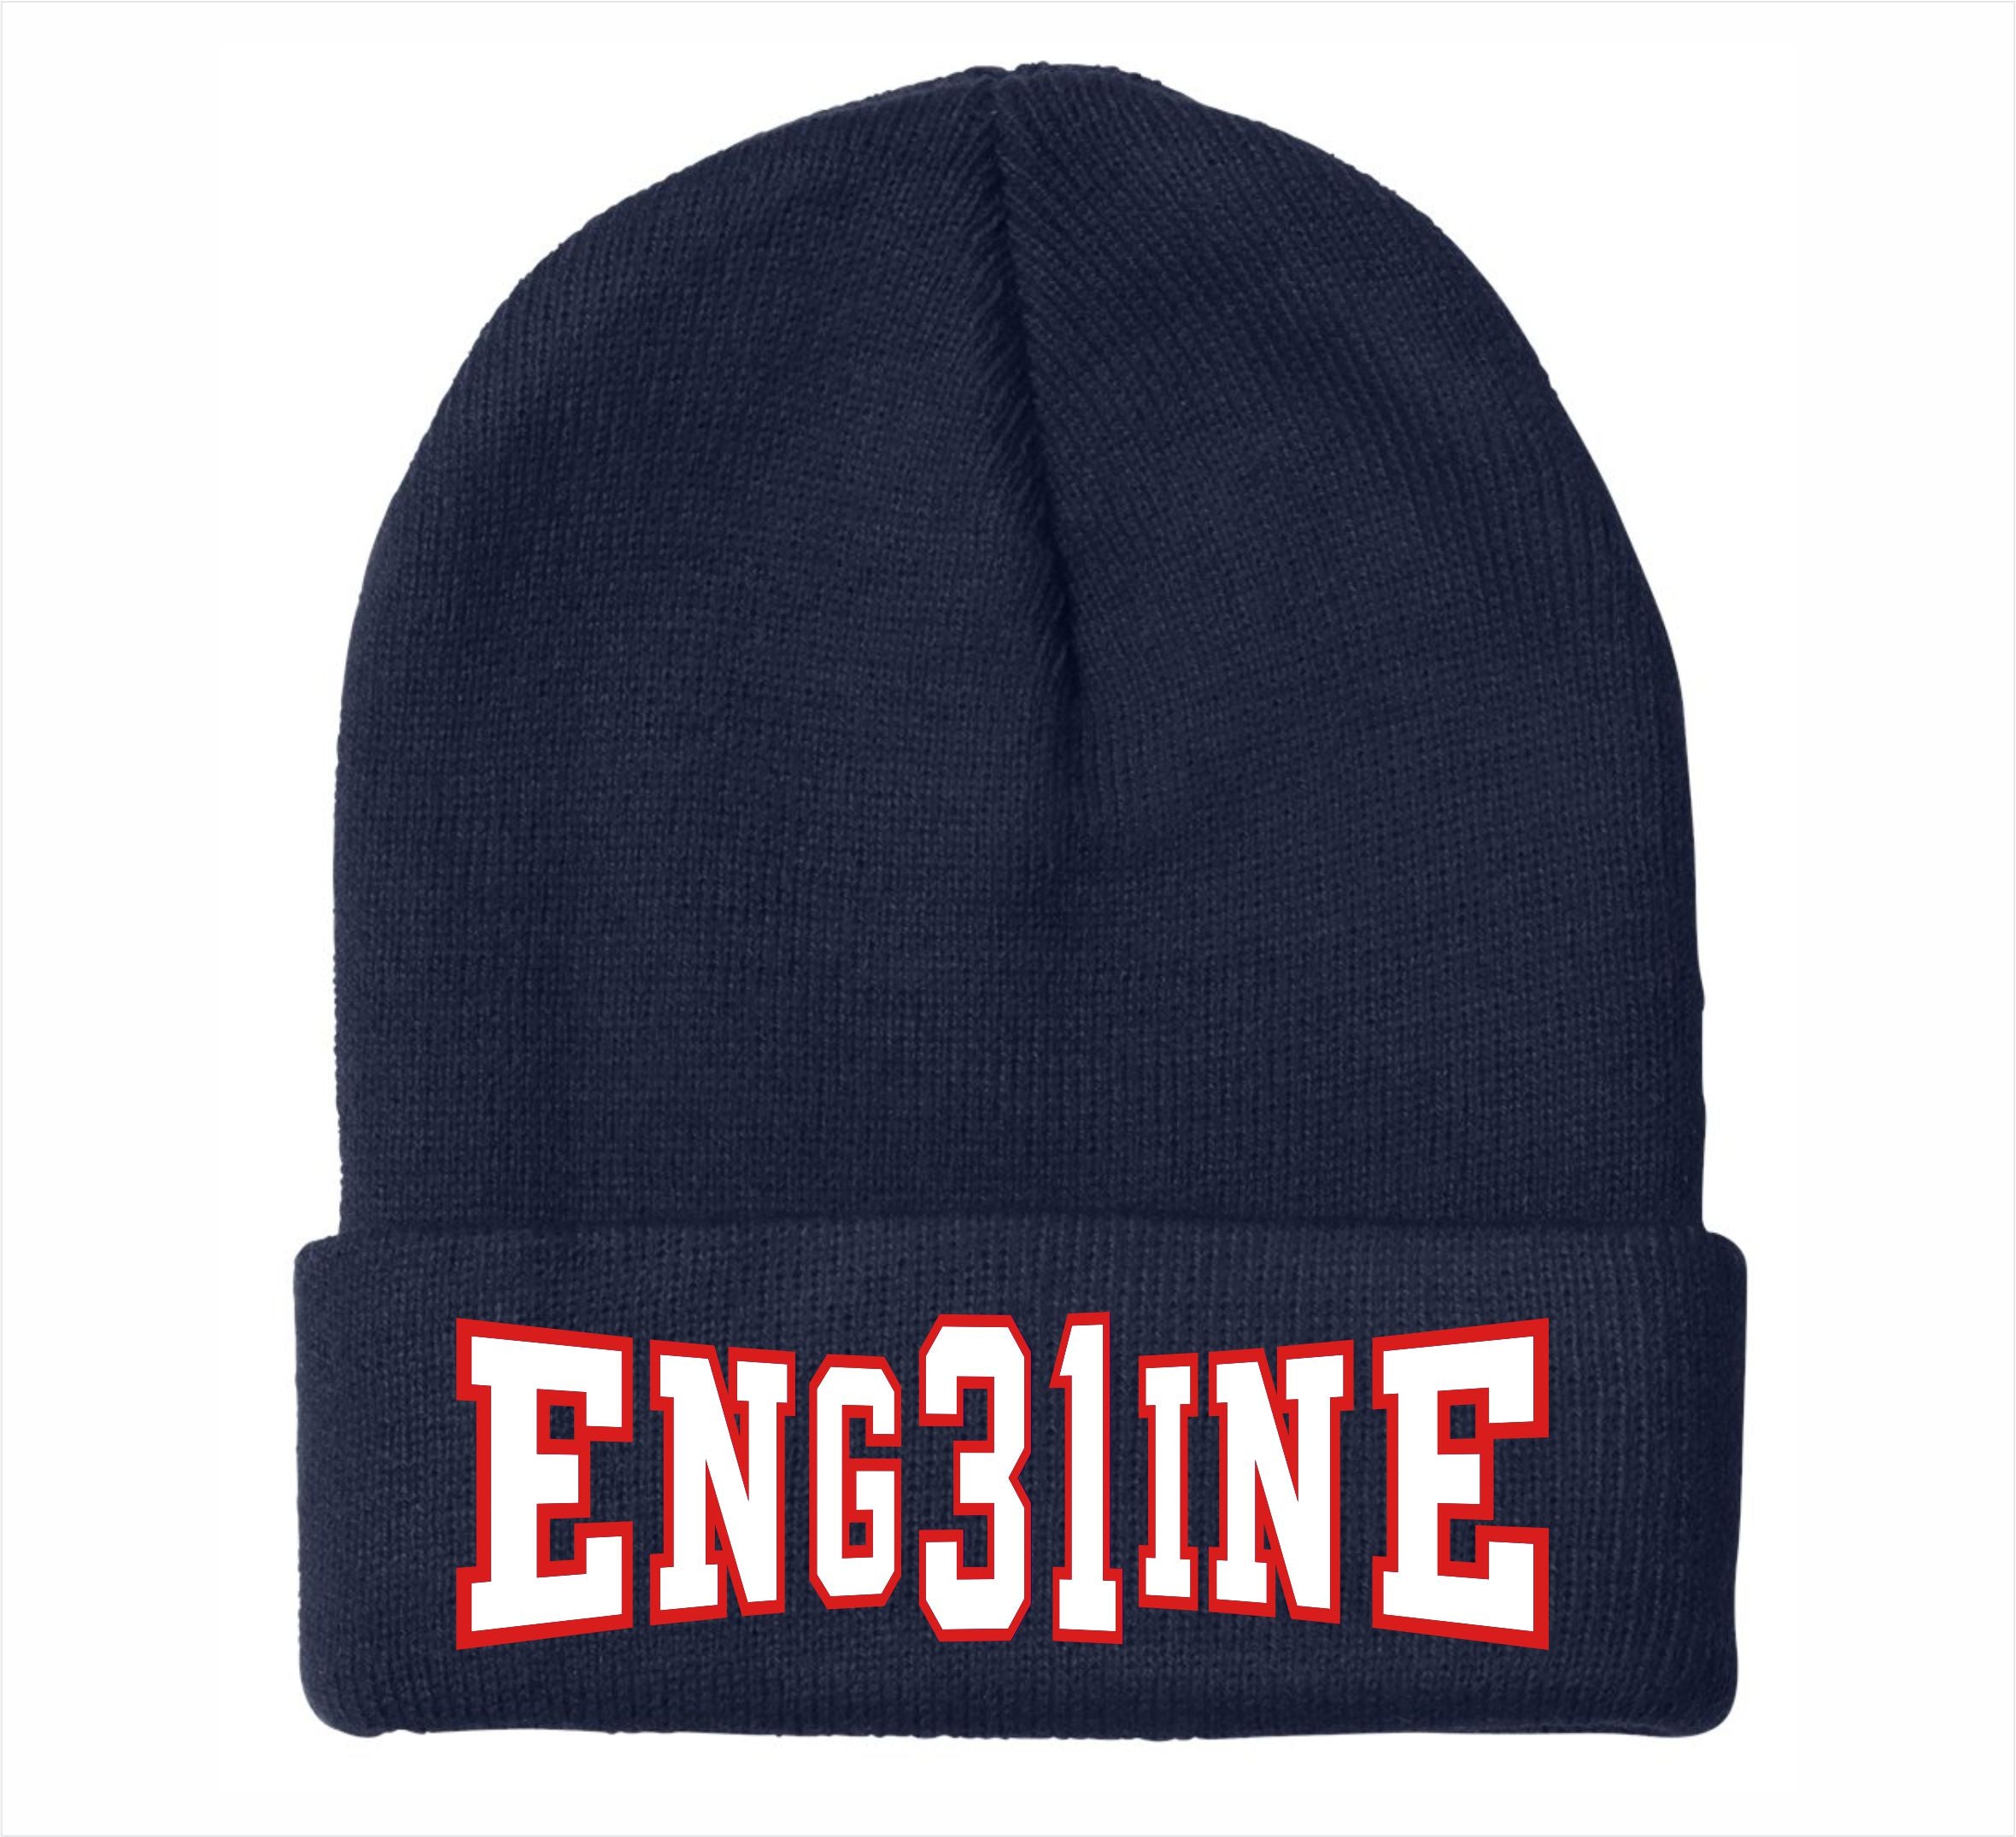 Eng31ine Customer Embroidered Winter Hat